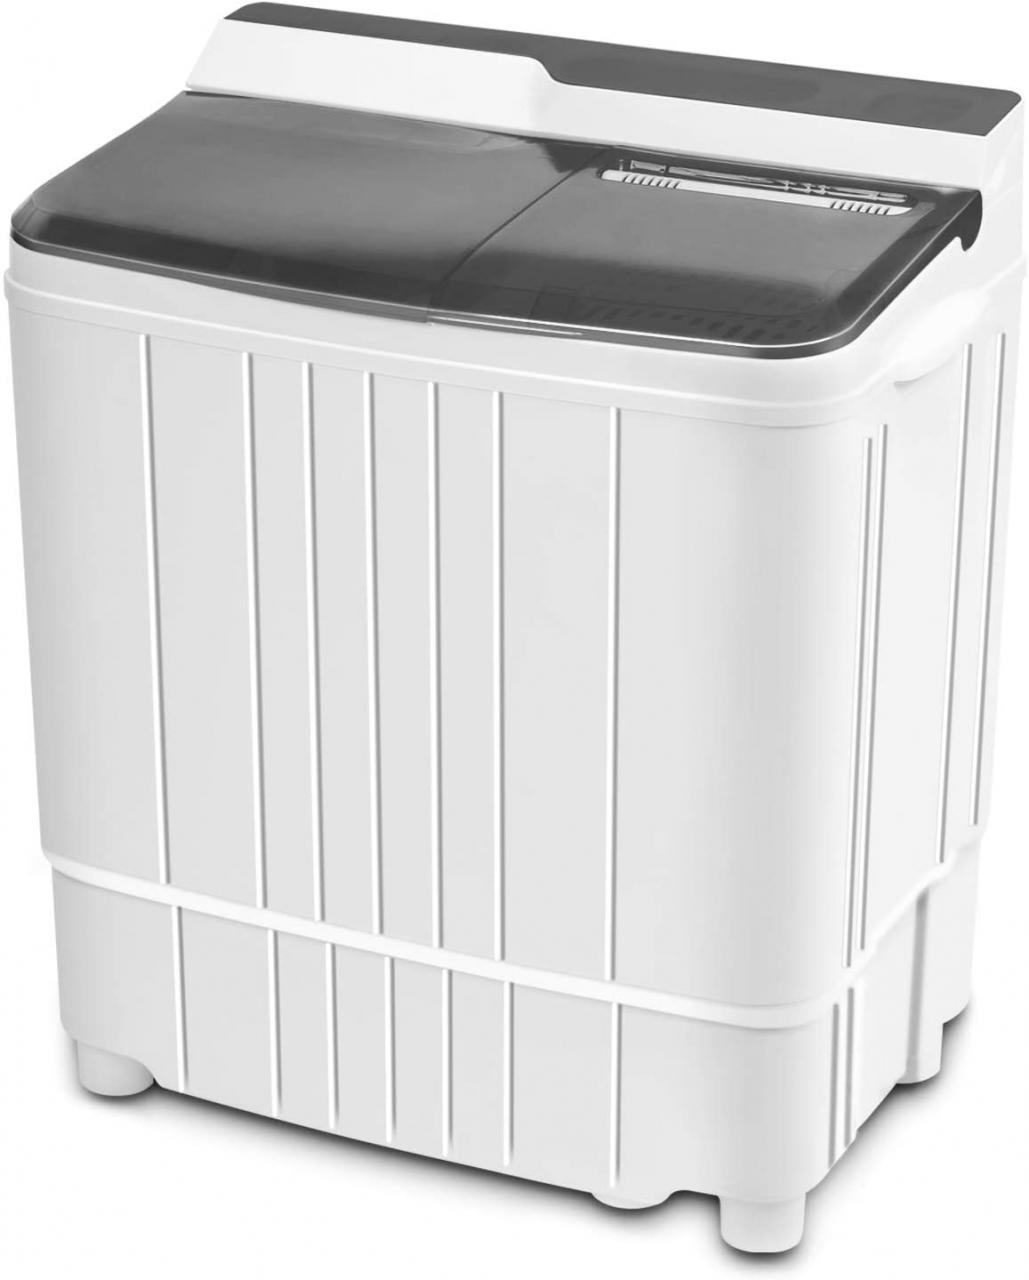 Buy Portable Mini Washing Machine, Compact Twin Tub Washer (8.8lbs) and Spin  Dryer Combo (3.3lbs), Timer Control with Soaking Function Ideal for Dorms,  Apartments, RVs, Camping etc, Gray Online in Taiwan. 549687124